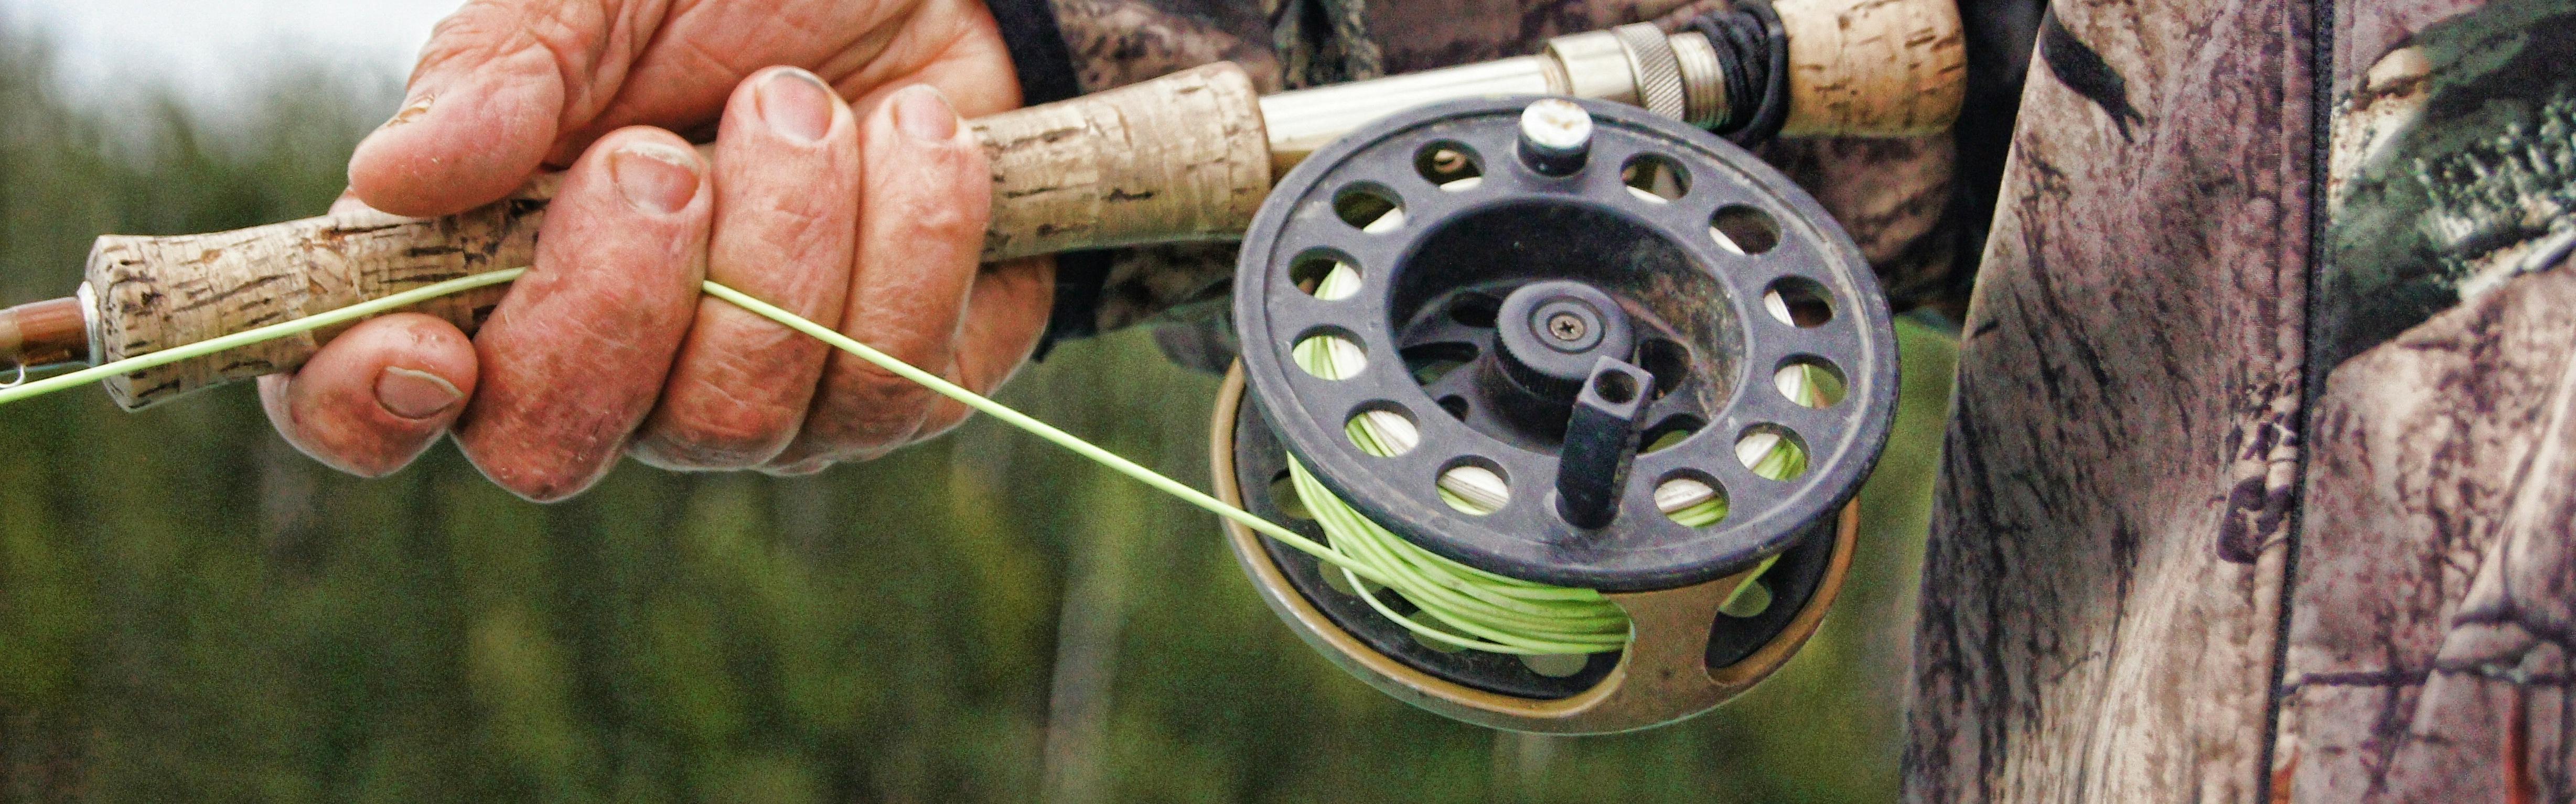 North Branch Reels, Machining of classic style fly reels